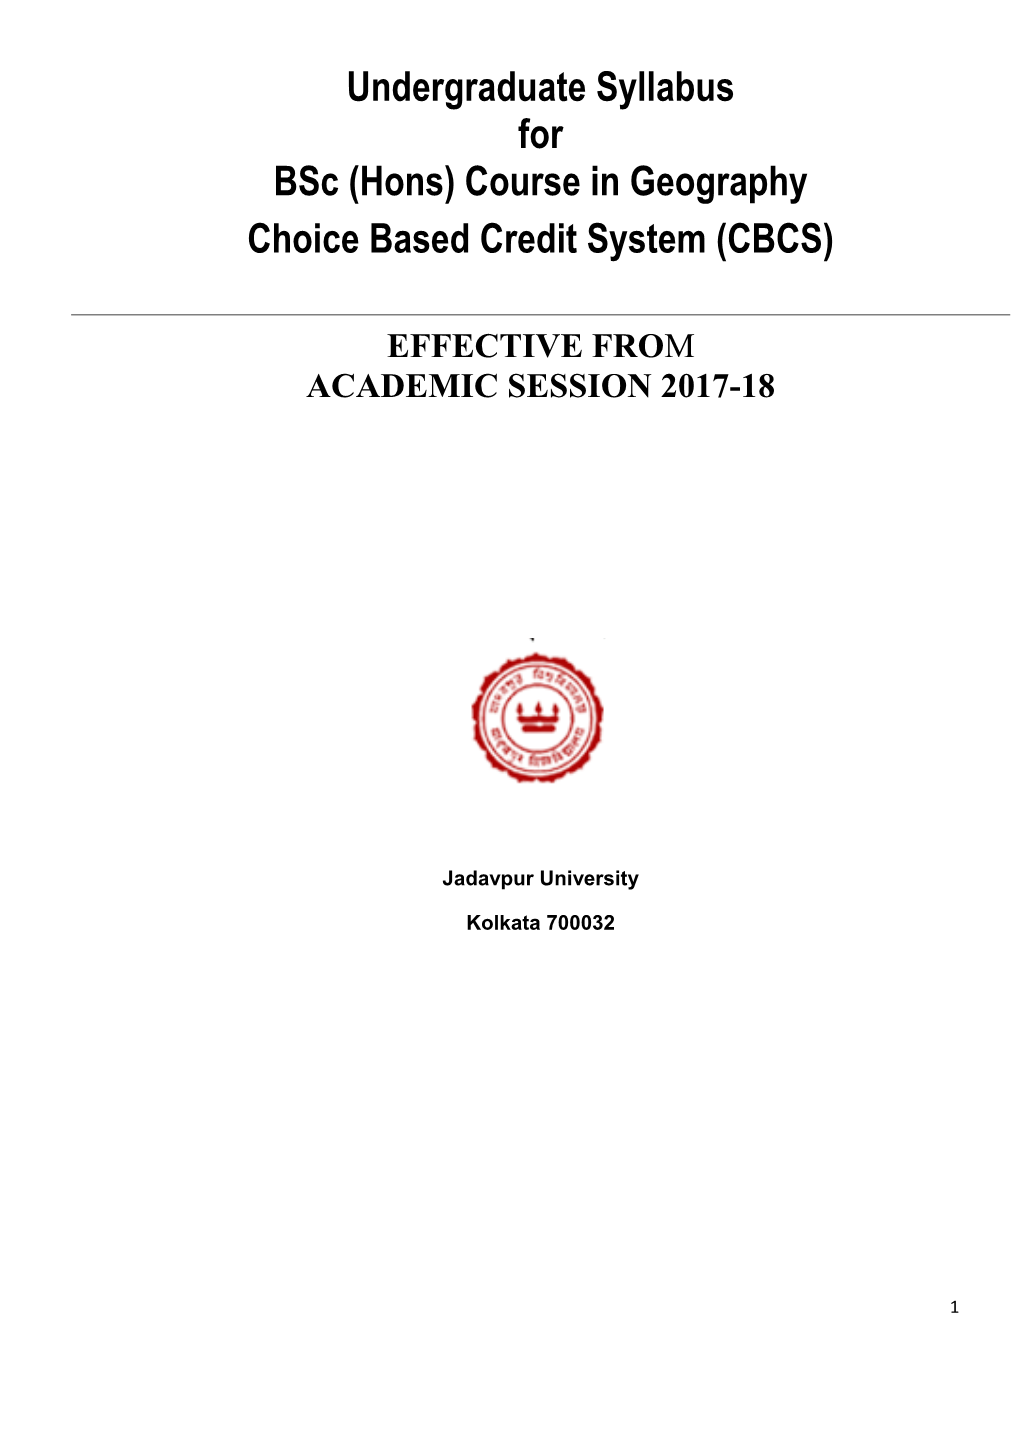 Undergraduate Syllabus for Bsc (Hons) Course in Geography Choice Based Credit System (CBCS)